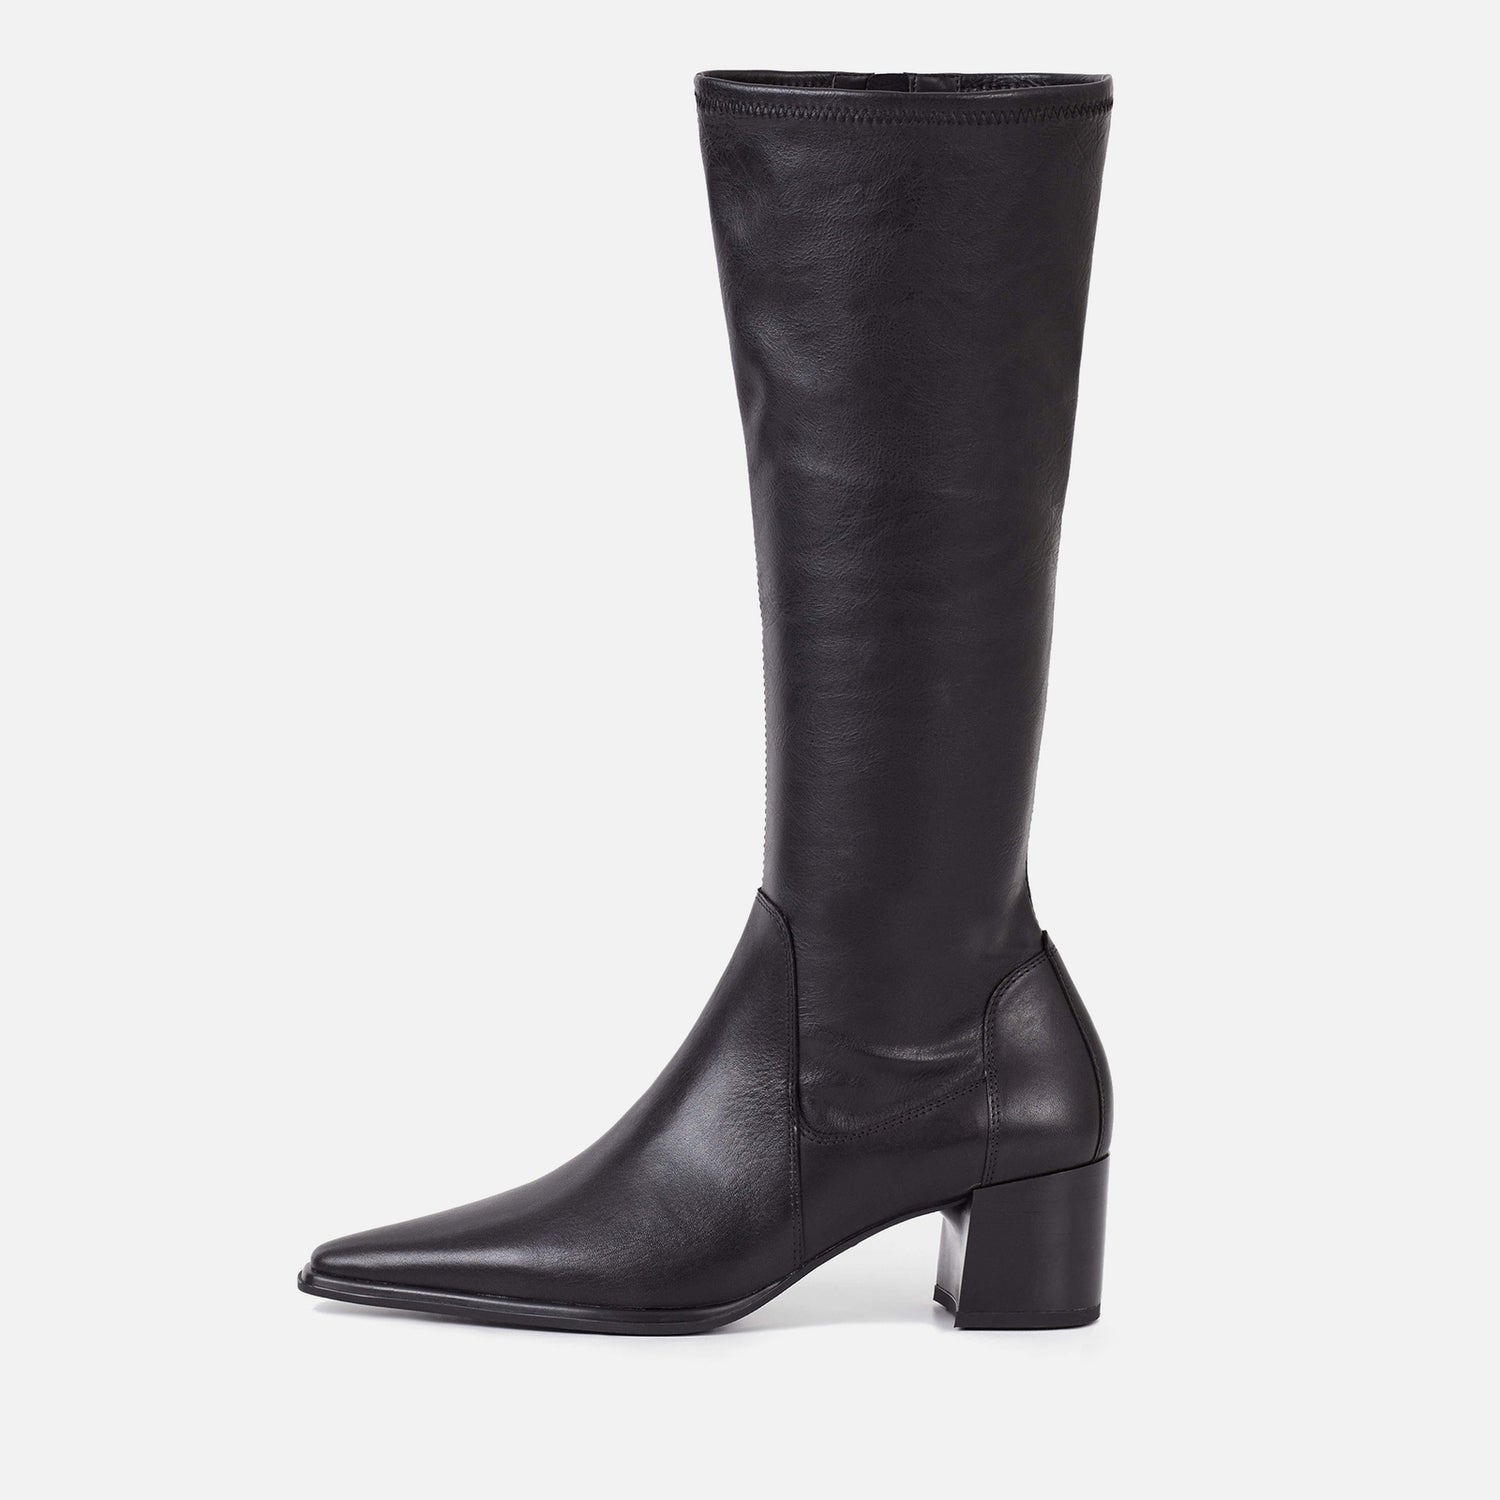 Vagabond Women's Giselle Leather and Faux Leather Knee High Boots - UK 3